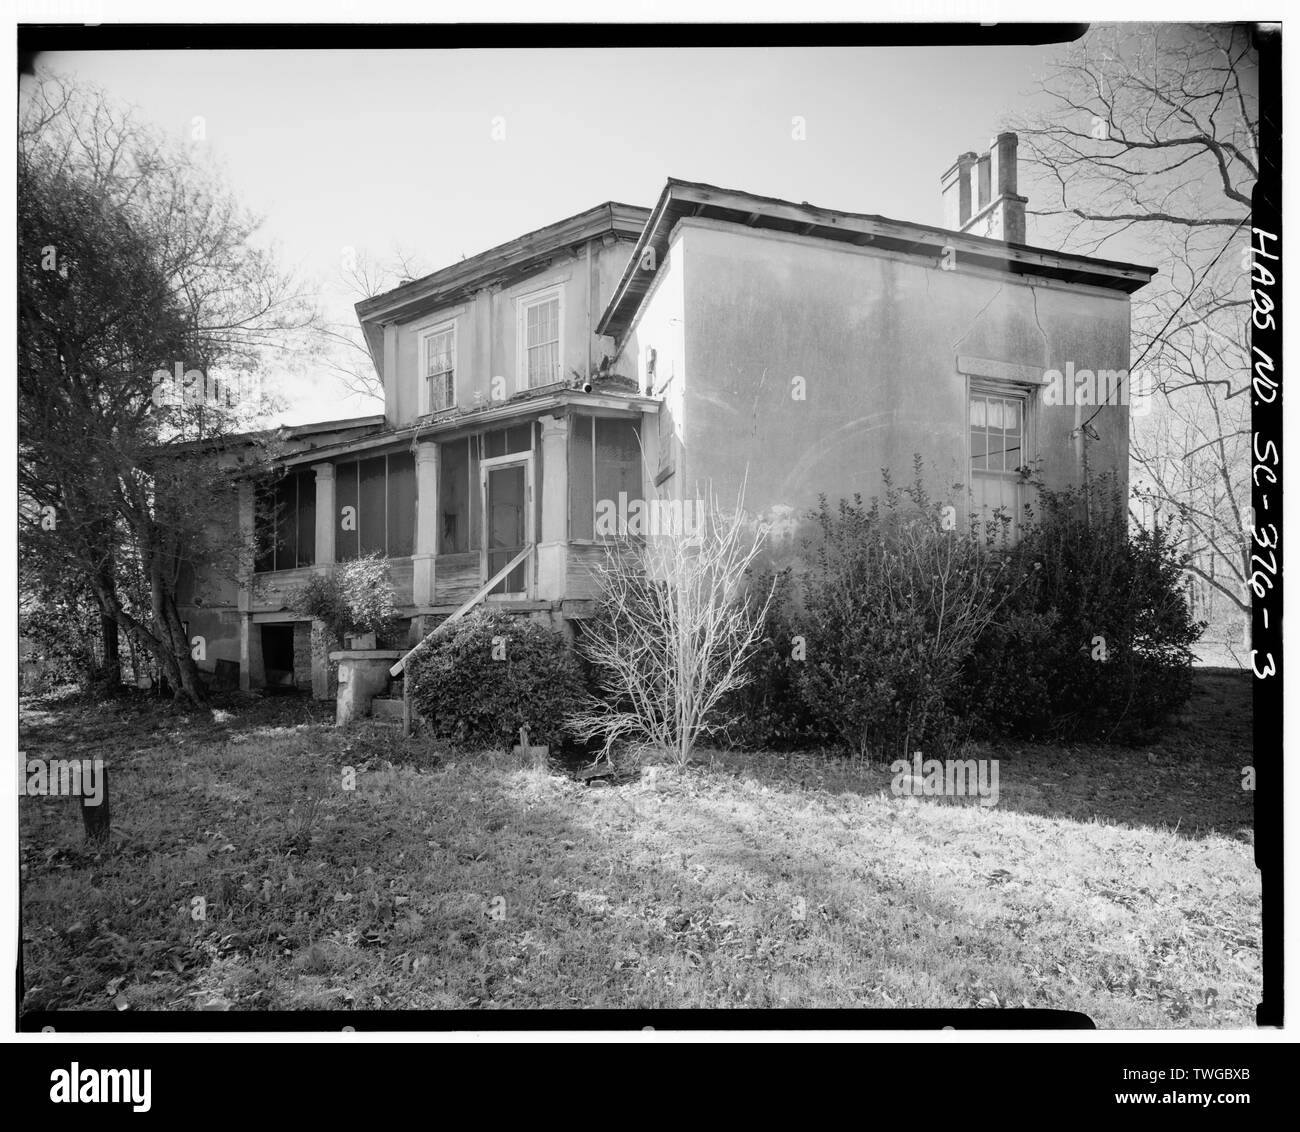 REAR ELEVATION, LOOKING NORTH - Zelotes Holmes House, 619 East Main Street, Laurens, Laurens County, SC; Holmes, Zelotes; Cary, Brian, transmitter Stock Photo